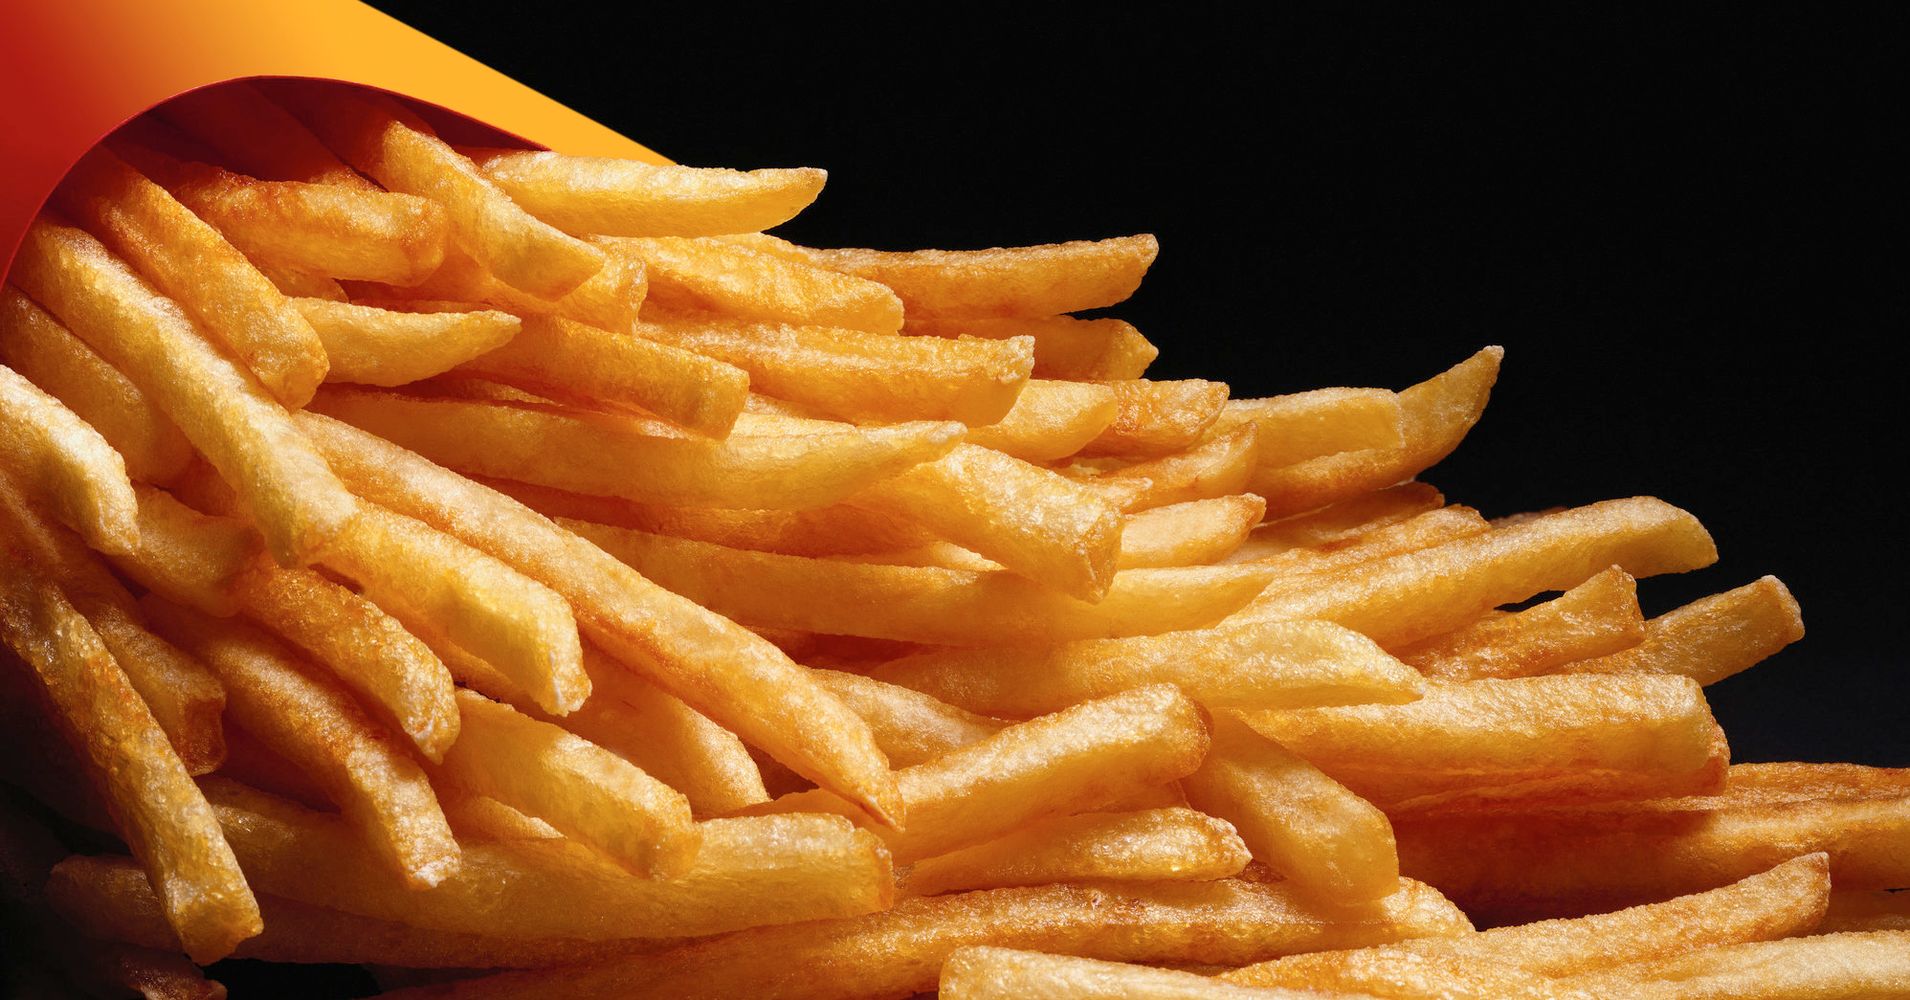 Maryland Woman Arrested For Stealing 3 French Fries From A Police Officer | HuffPost